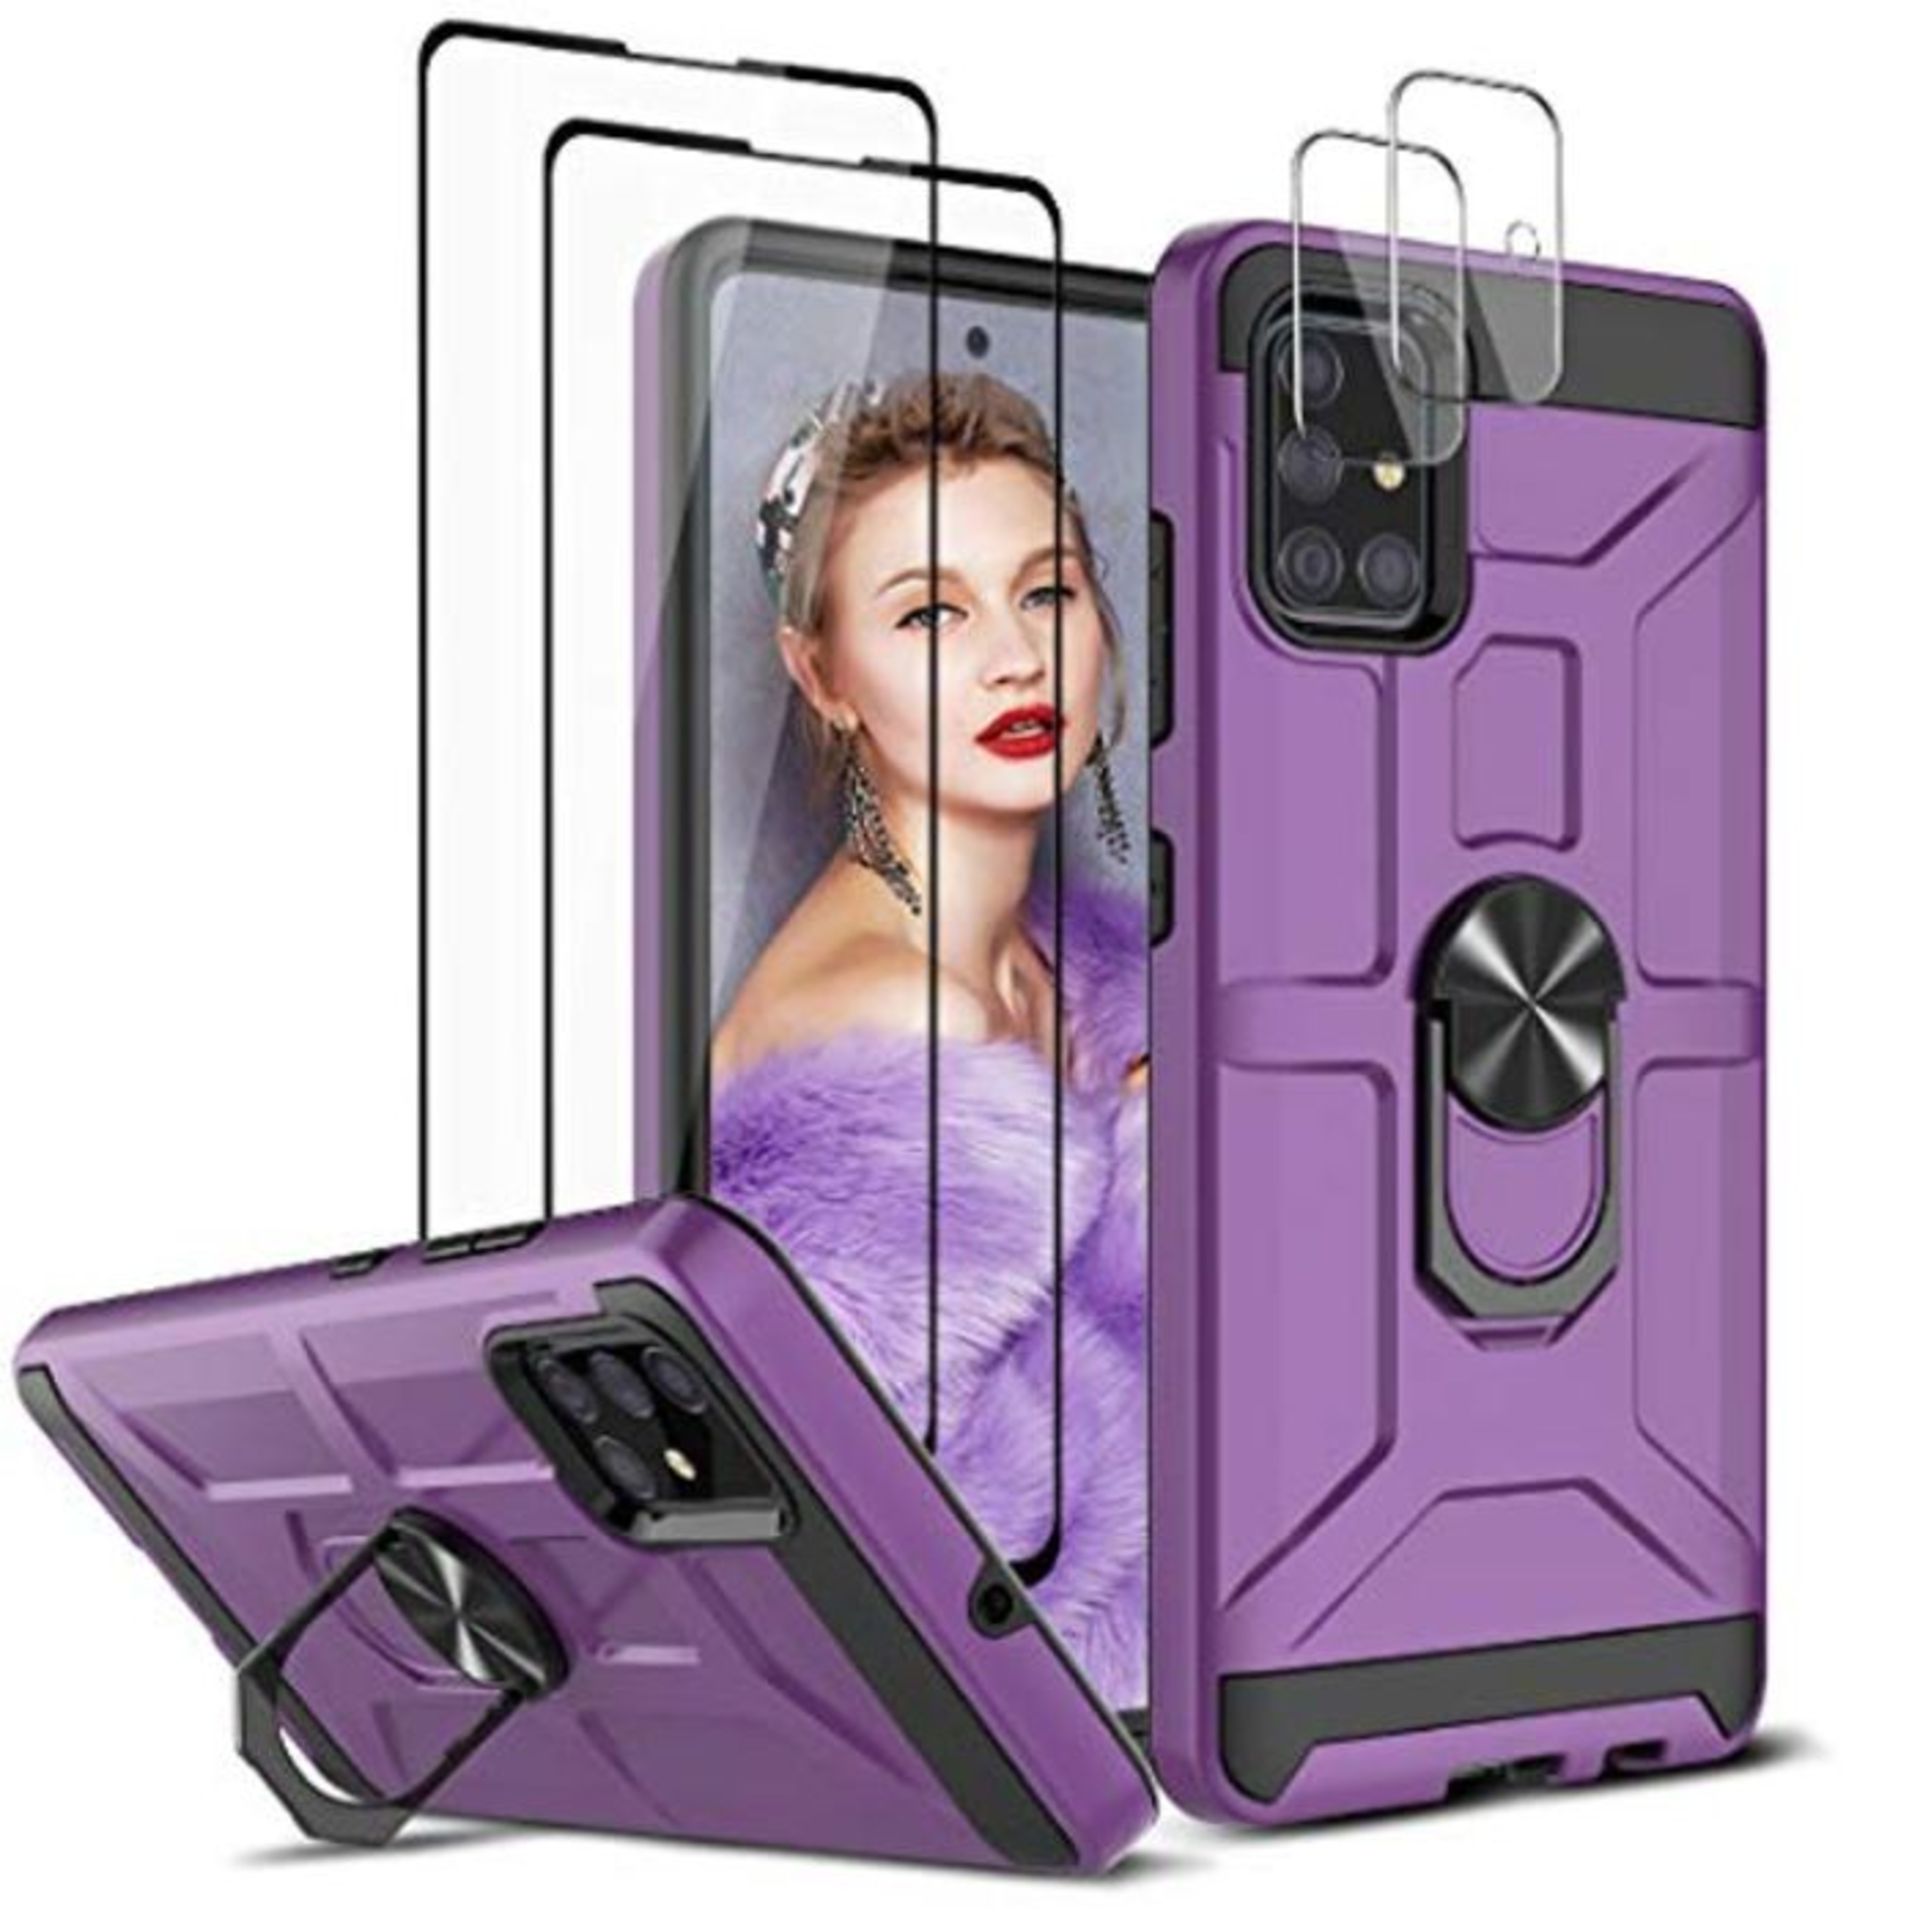 COMBINED RRP £1395.00 LOT TO CONTAIN 174 ASSORTED Tech Products: Amazon, OtterBox, Tec-Digi, Sc - Image 12 of 92